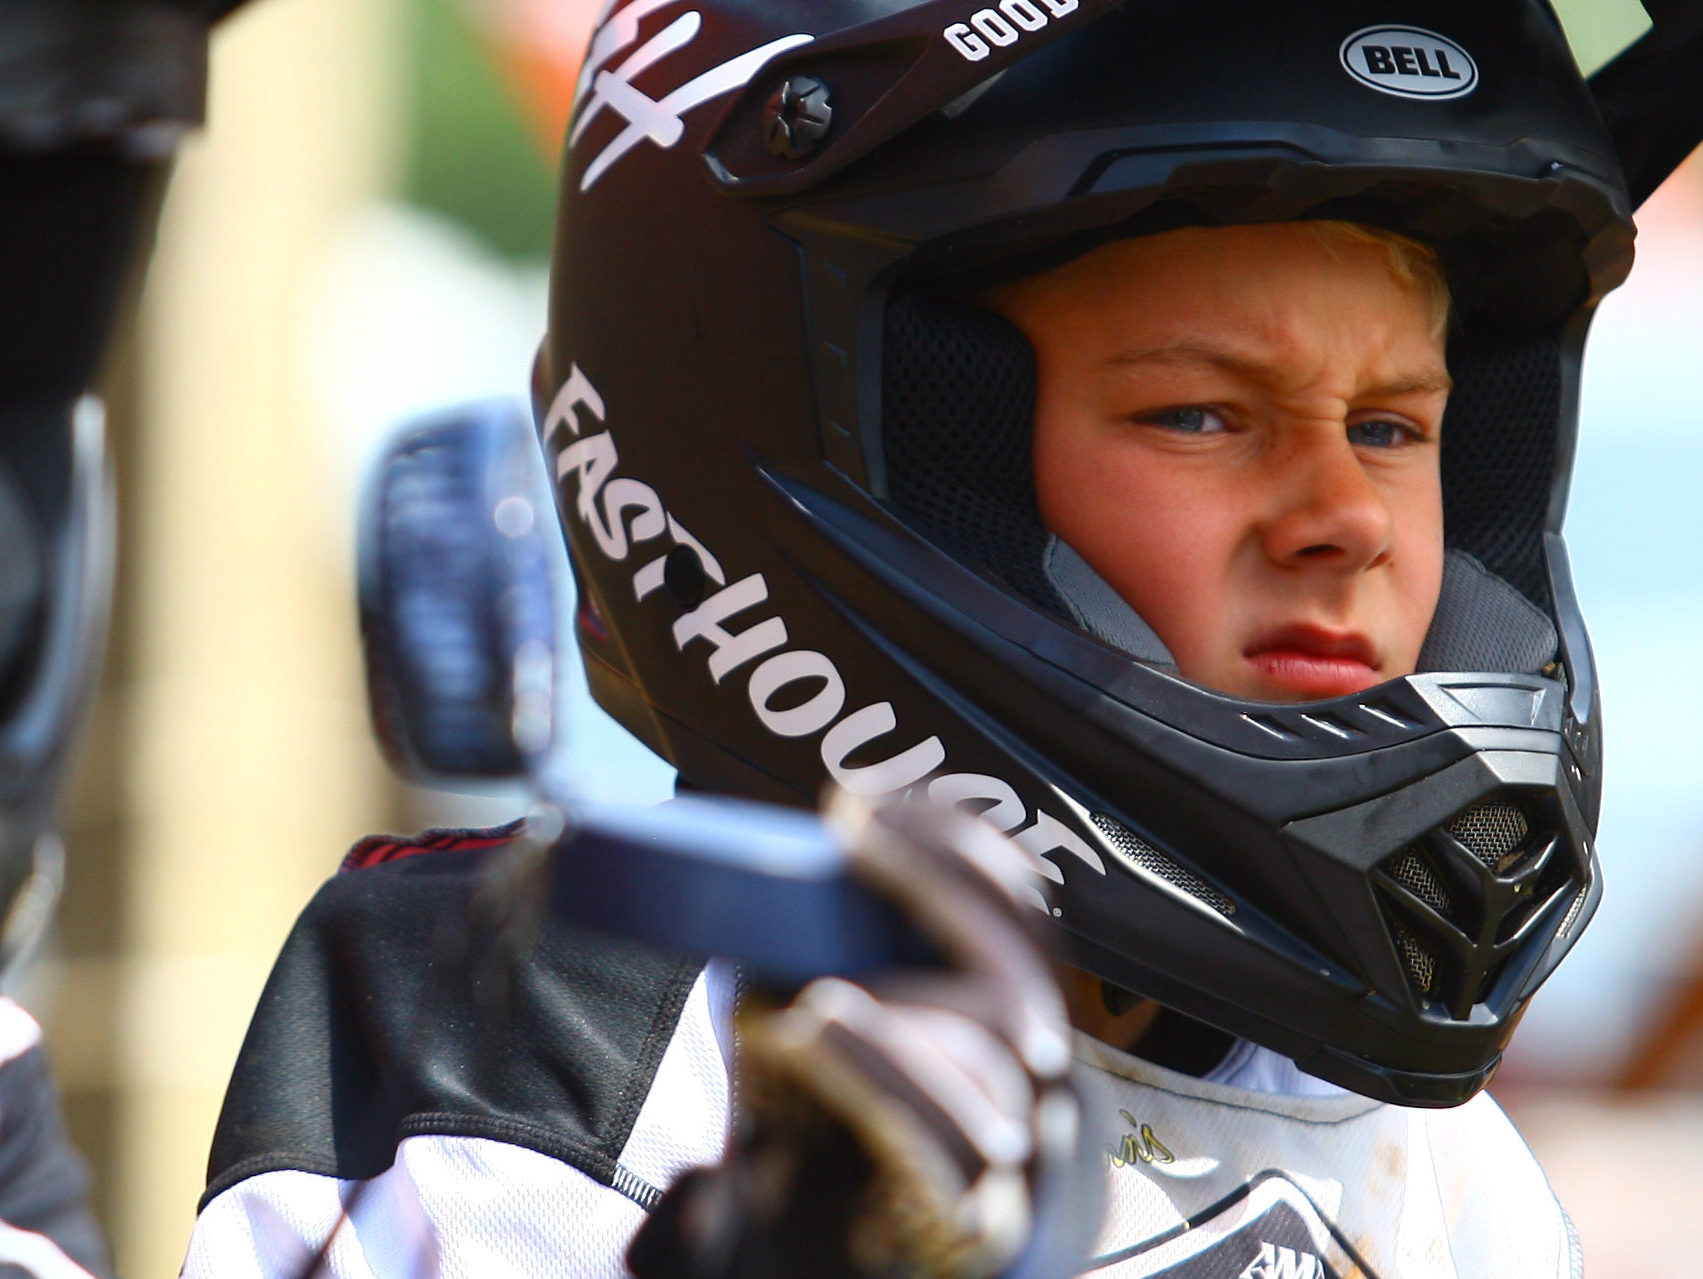 Close up of youth wearing off-road helmet